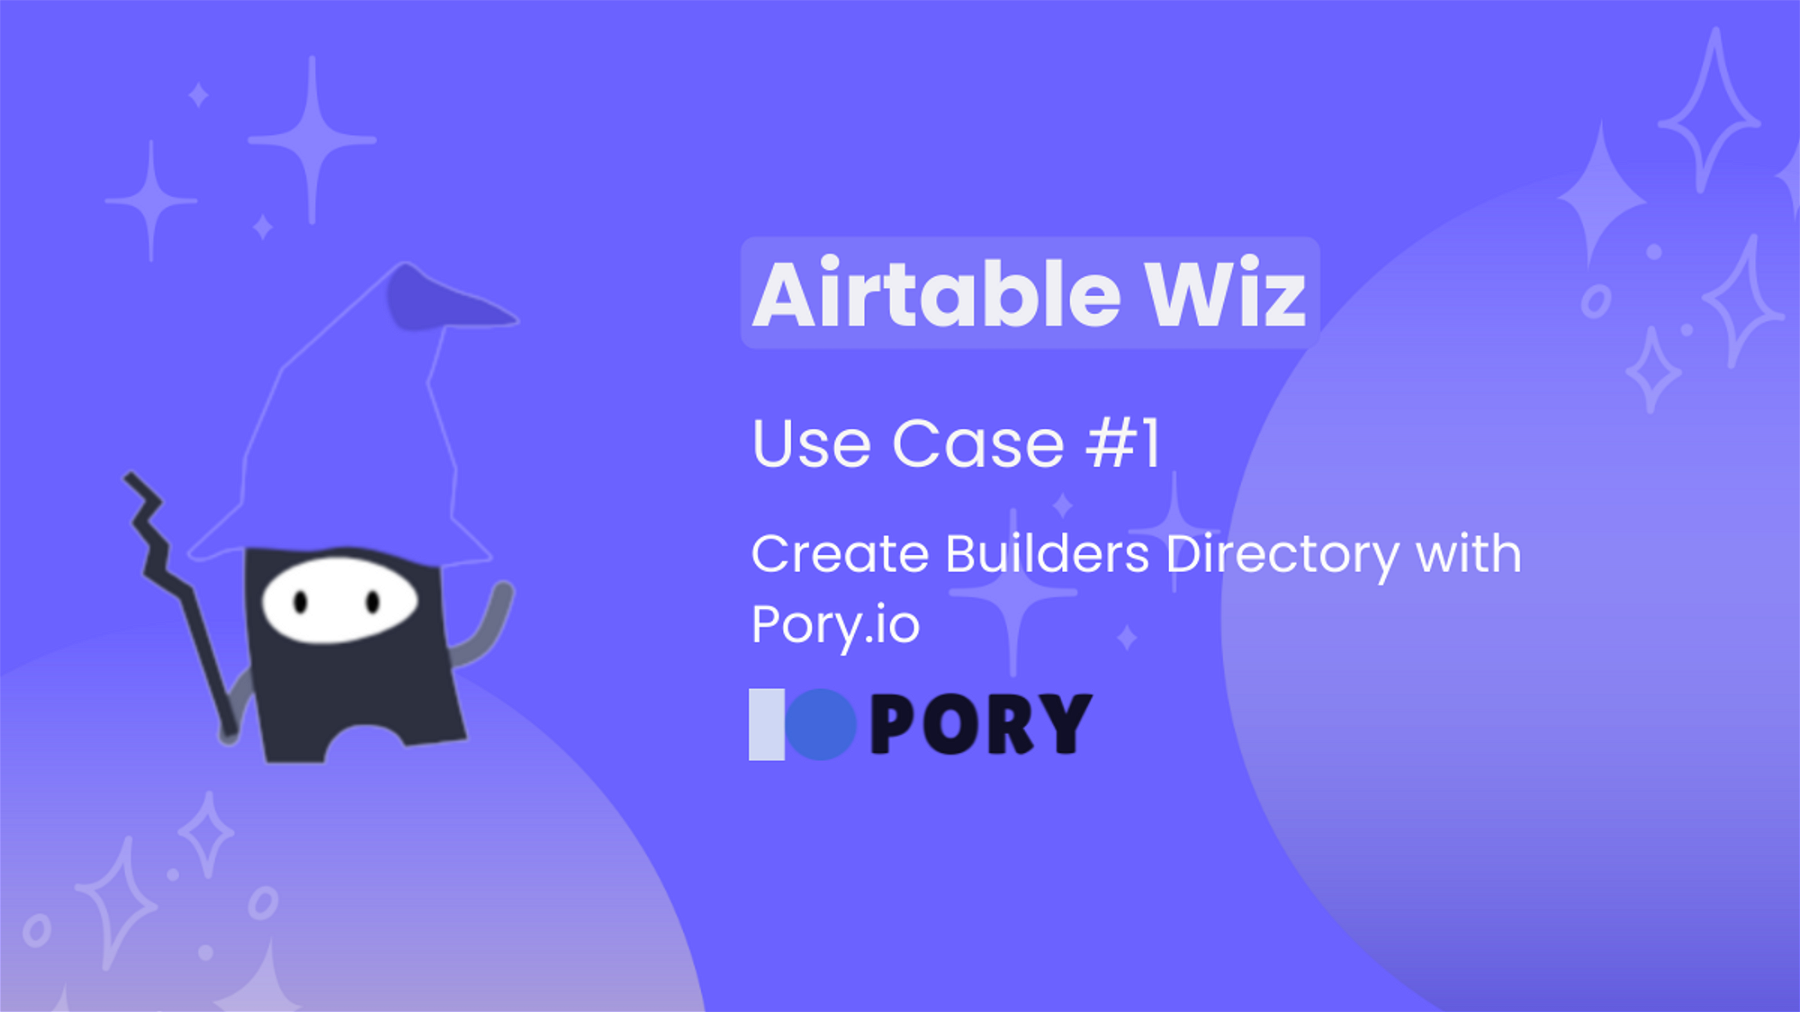 Use Case #1: Create A Directory with Pory.io